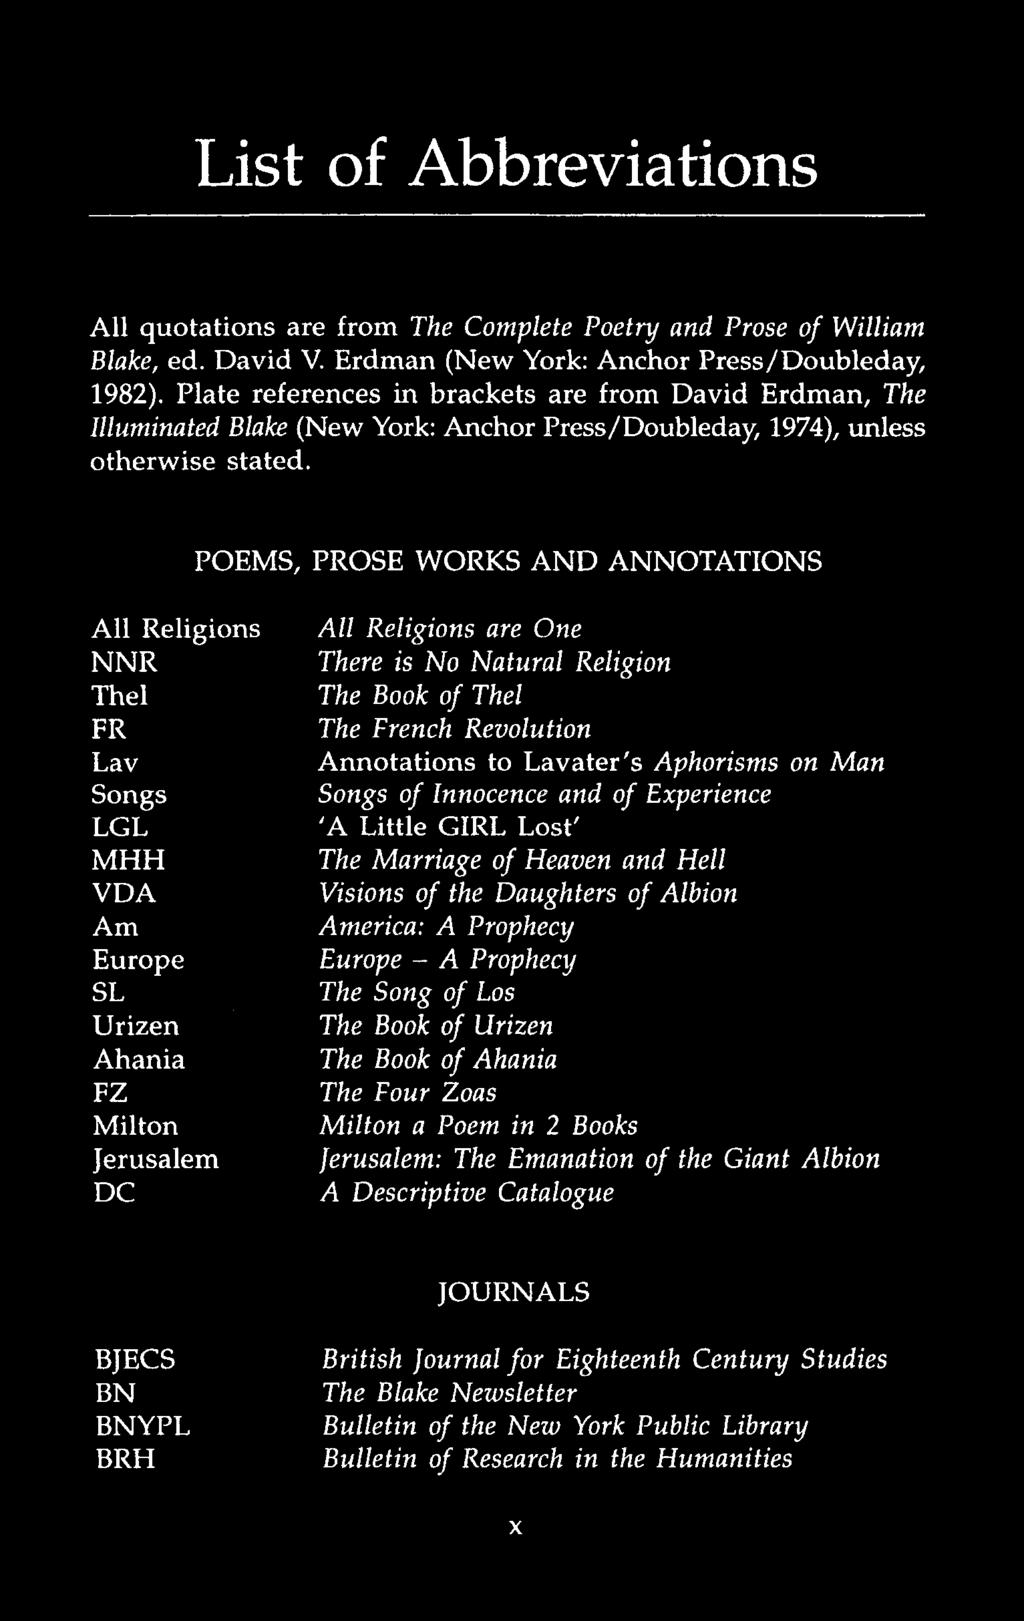 List of Abbreviations All quotations are from The Complete Poetry and Prose of William Blake, ed. David V. Erdman (New York: Anchor Press/Doubleday, 1982).